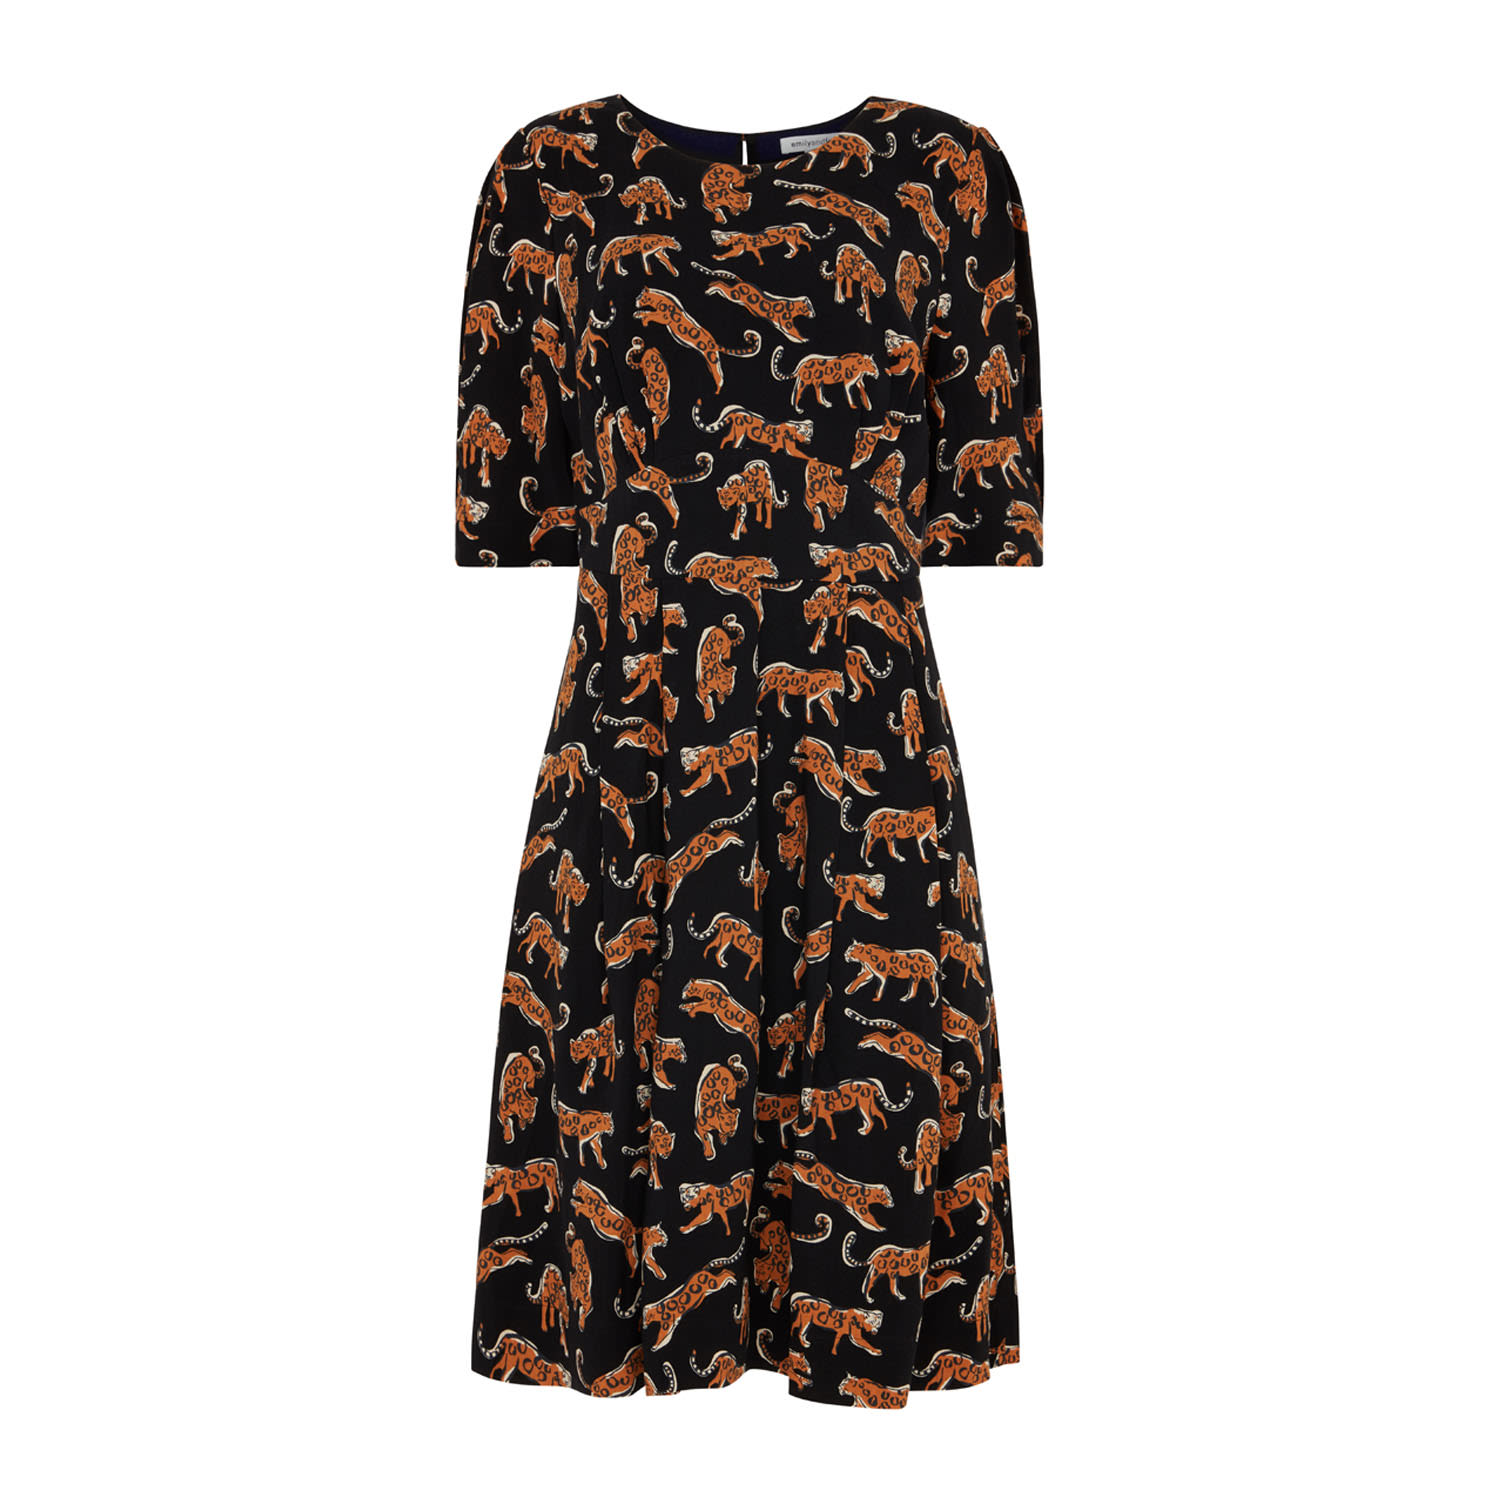 Emily And Fin Women's Black / Brown Meredith Leaping Leopards Dress